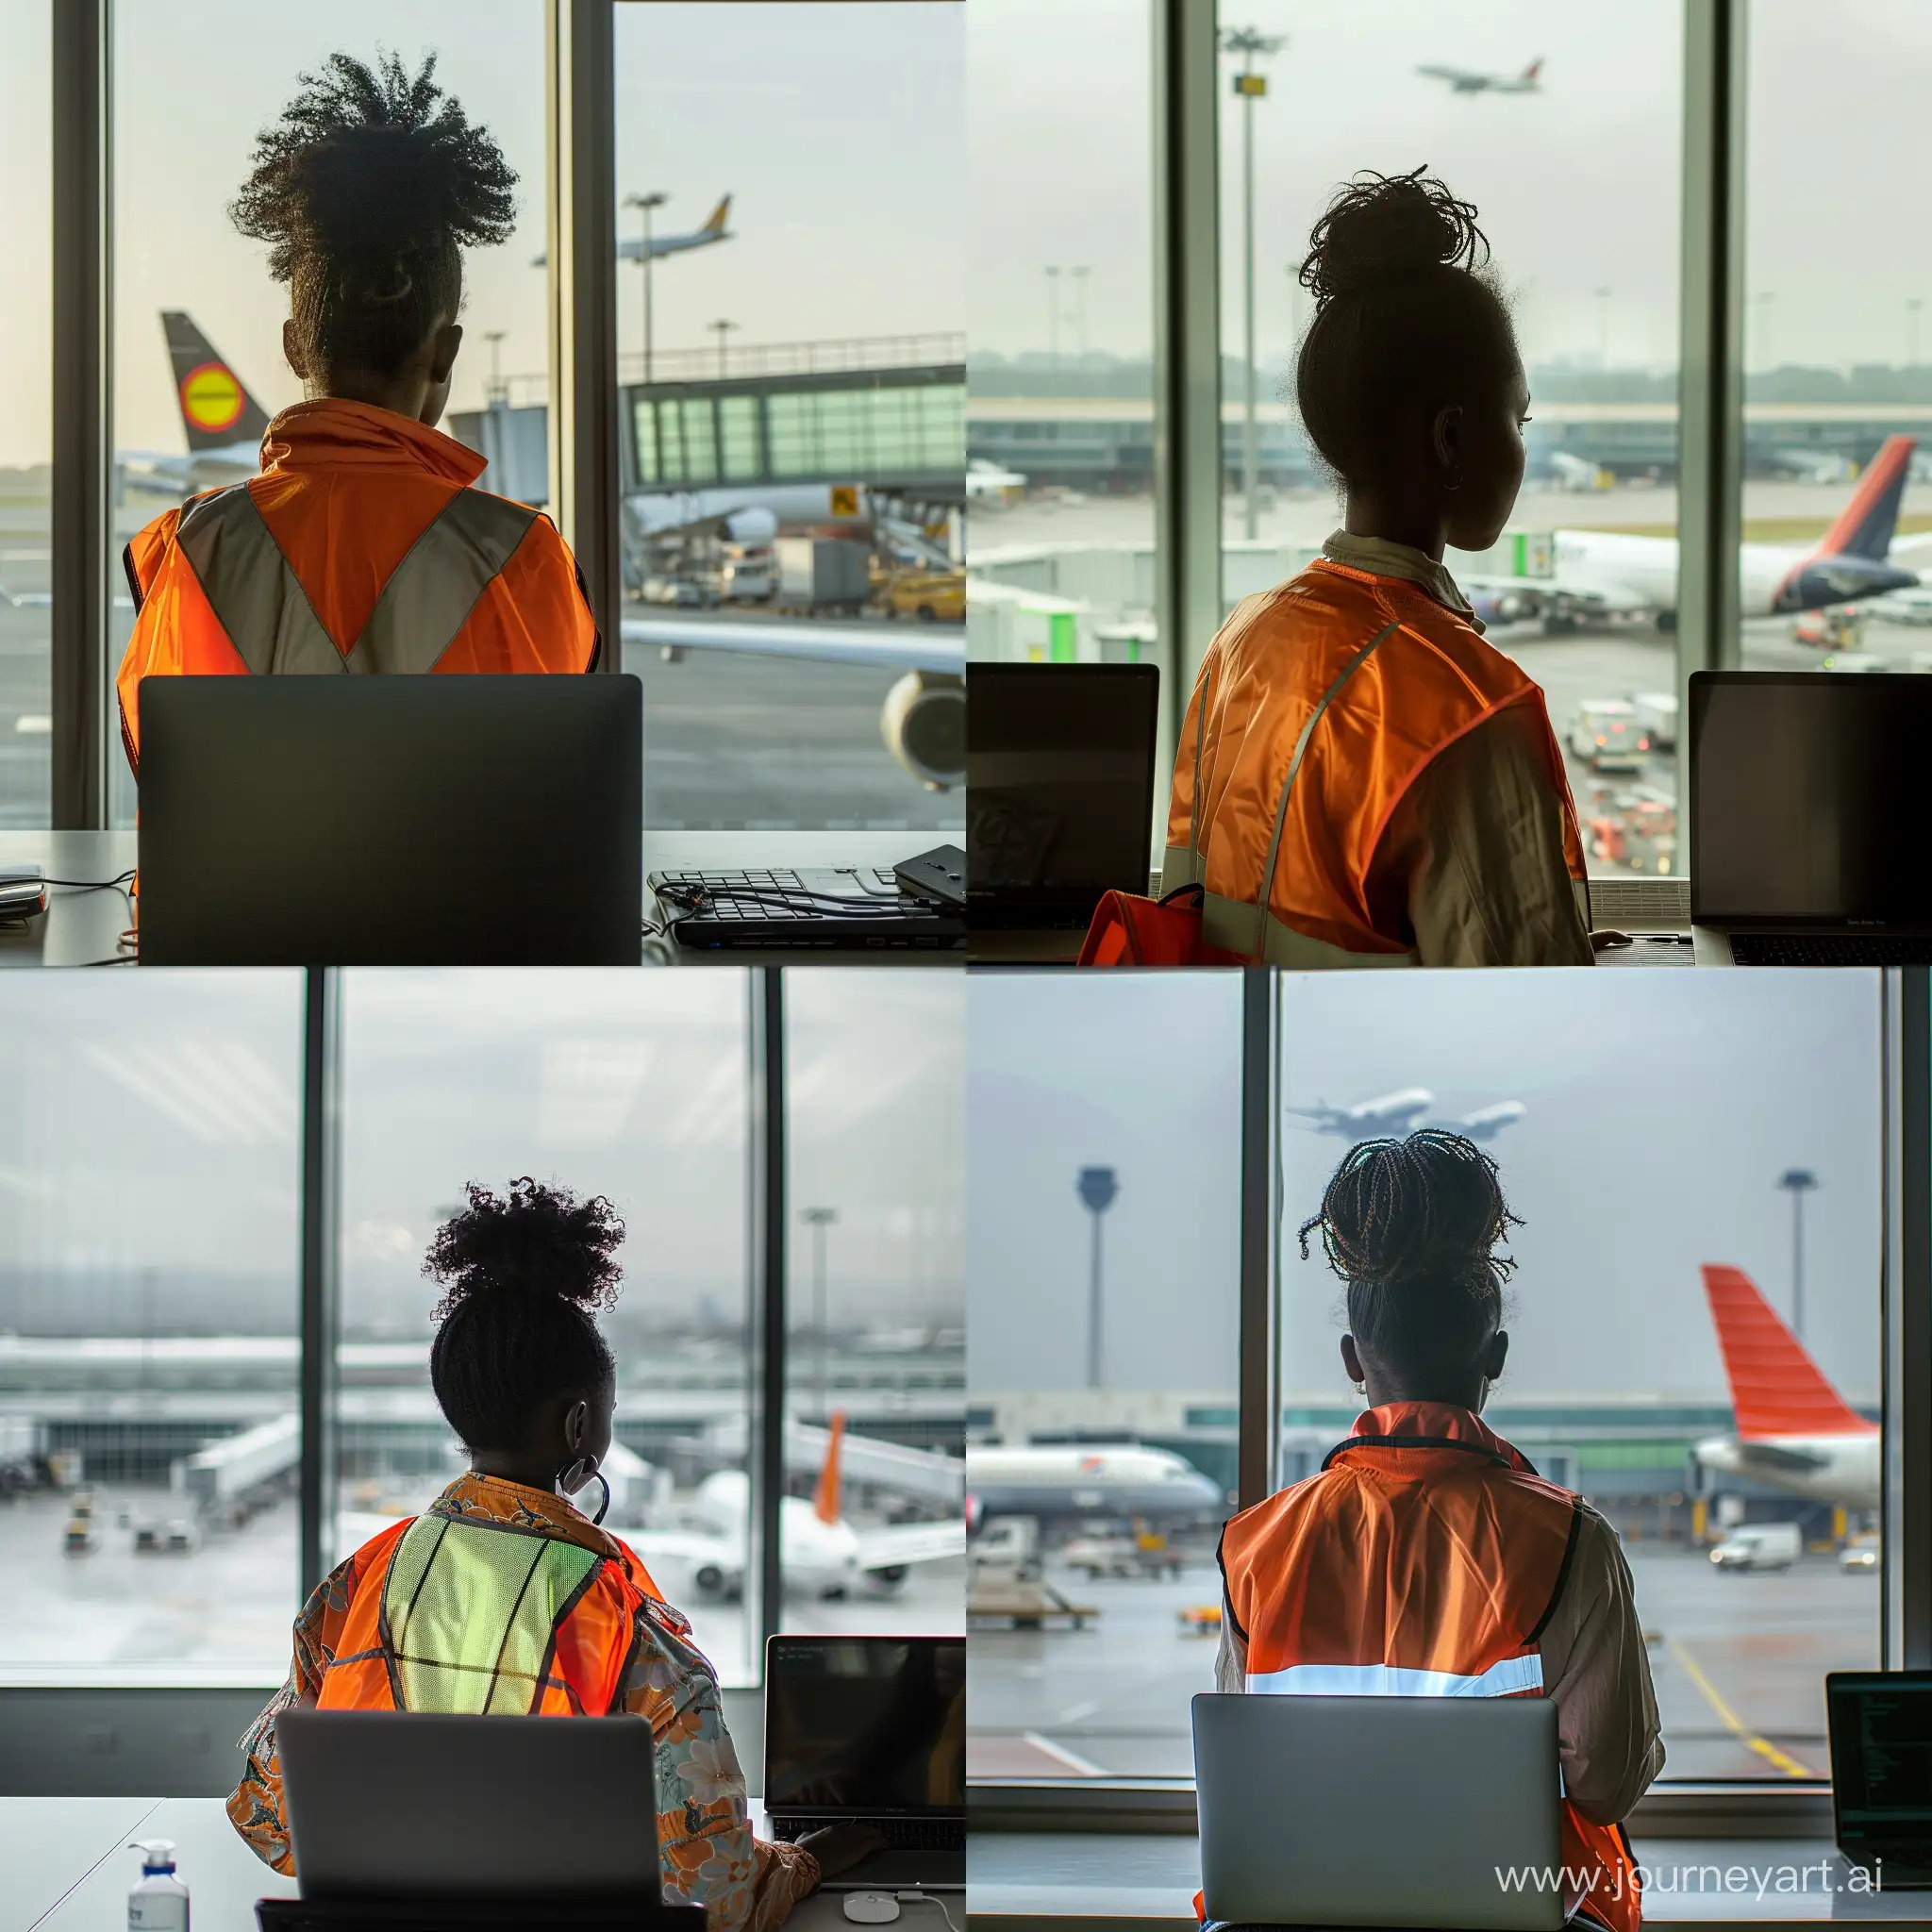 African  girl  working in an office, with a reflector jacket onbher laptop late 20s,lines hairstyles facing back to large open windows at an airport with planes taking off